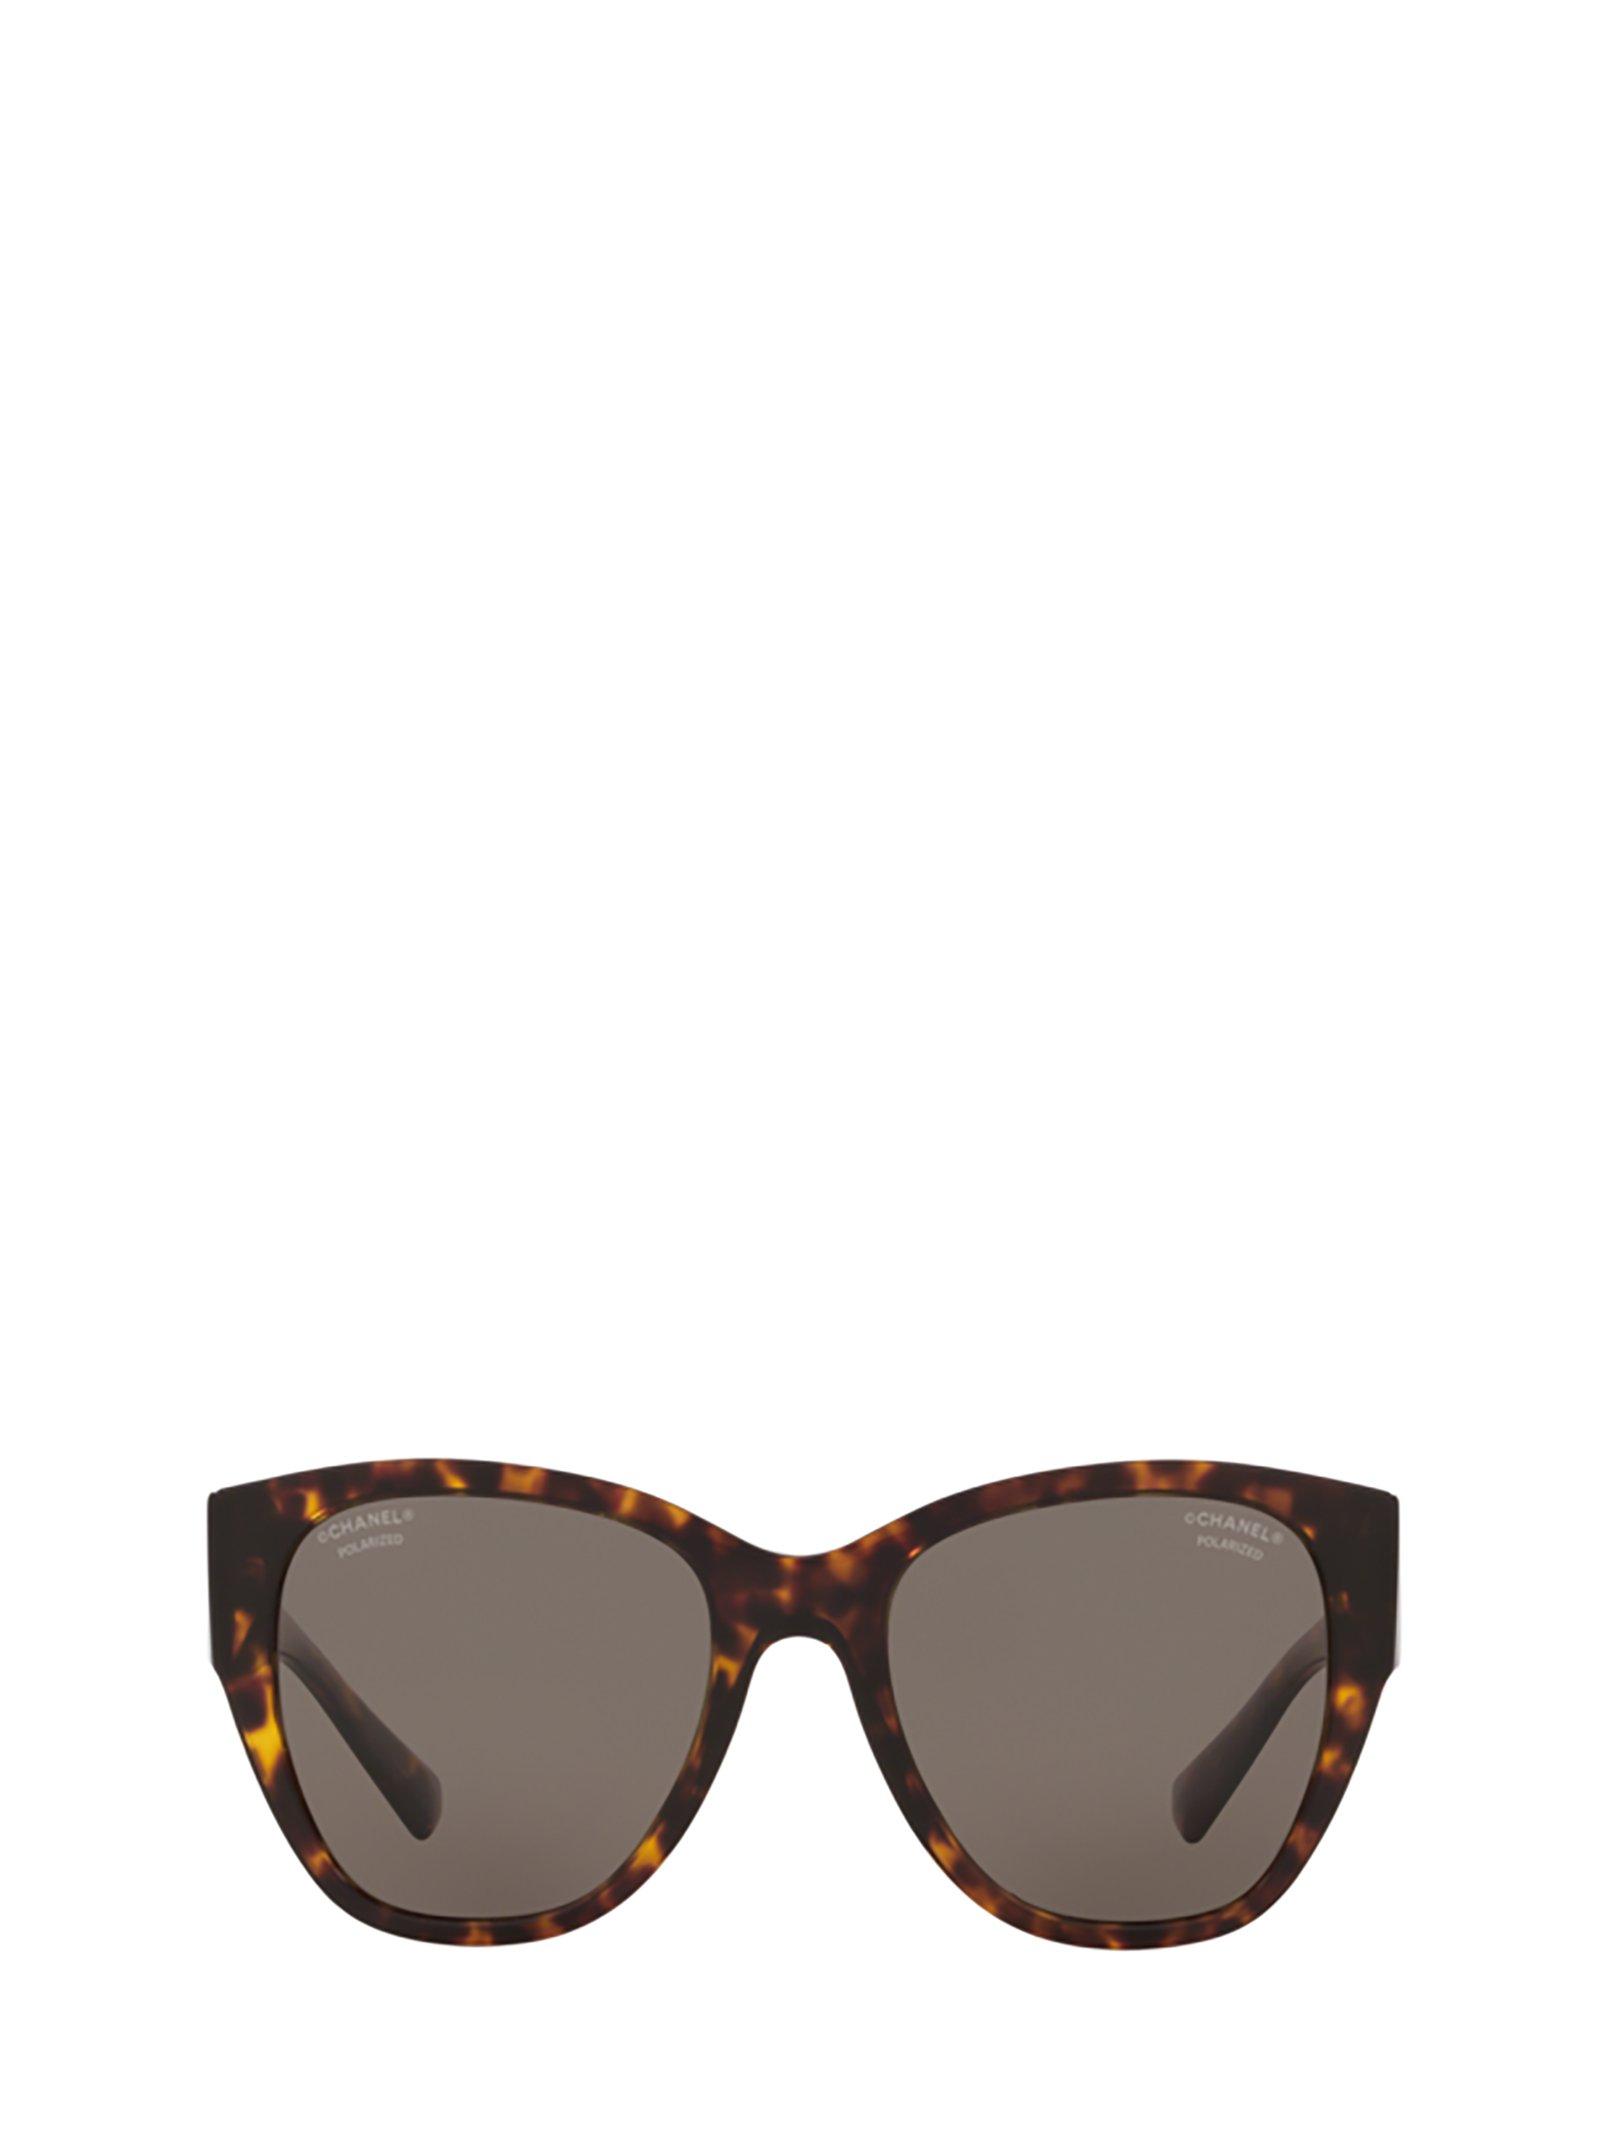 Chanel Round Frame Cat Eye Sunglasses in Brown - Lyst